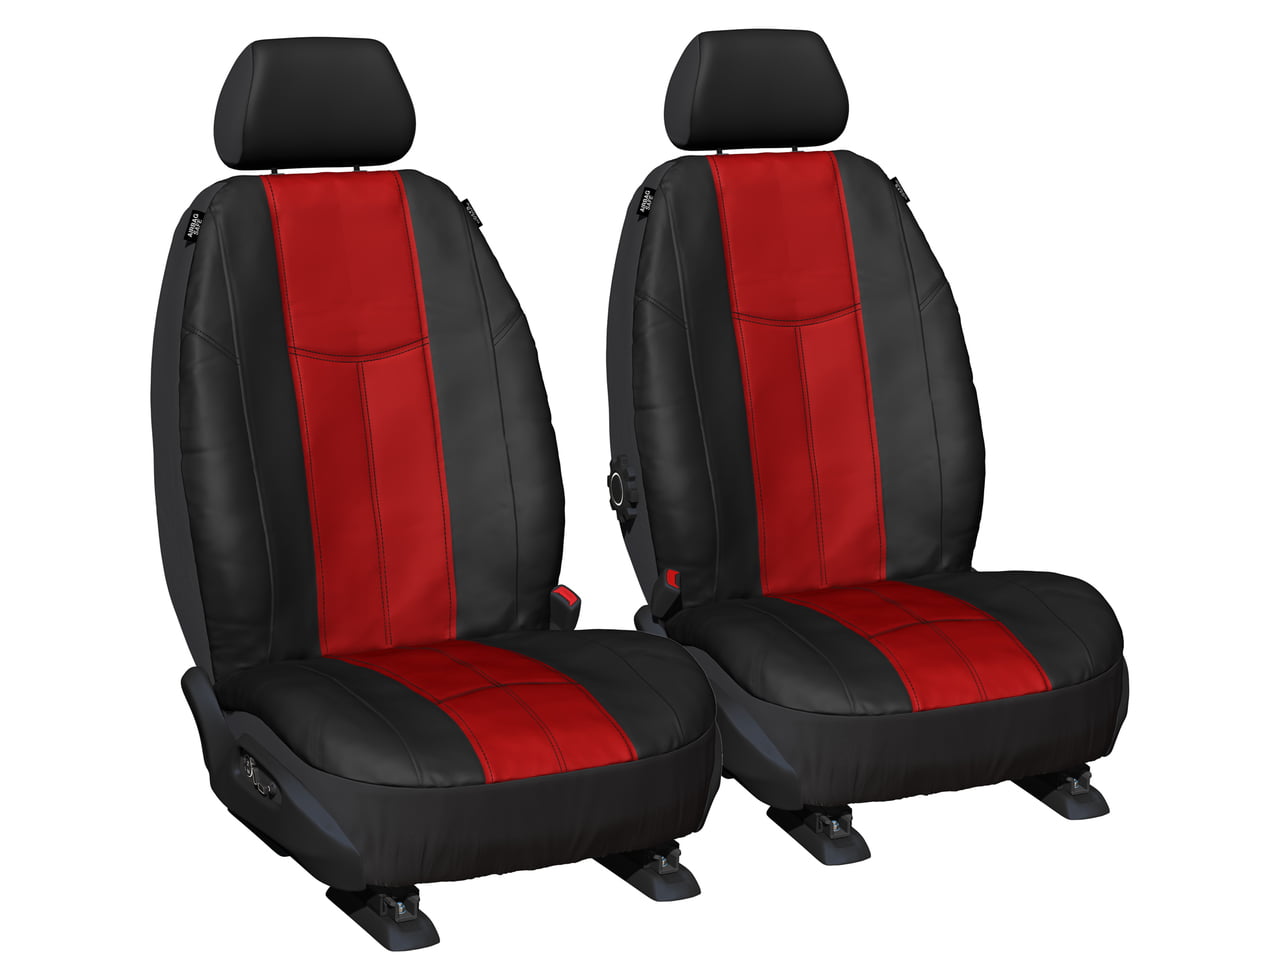 2 x Fronts 1+1 FOR HONDA CIVIC Heavy Duty Black Waterproof Car Seat Covers 